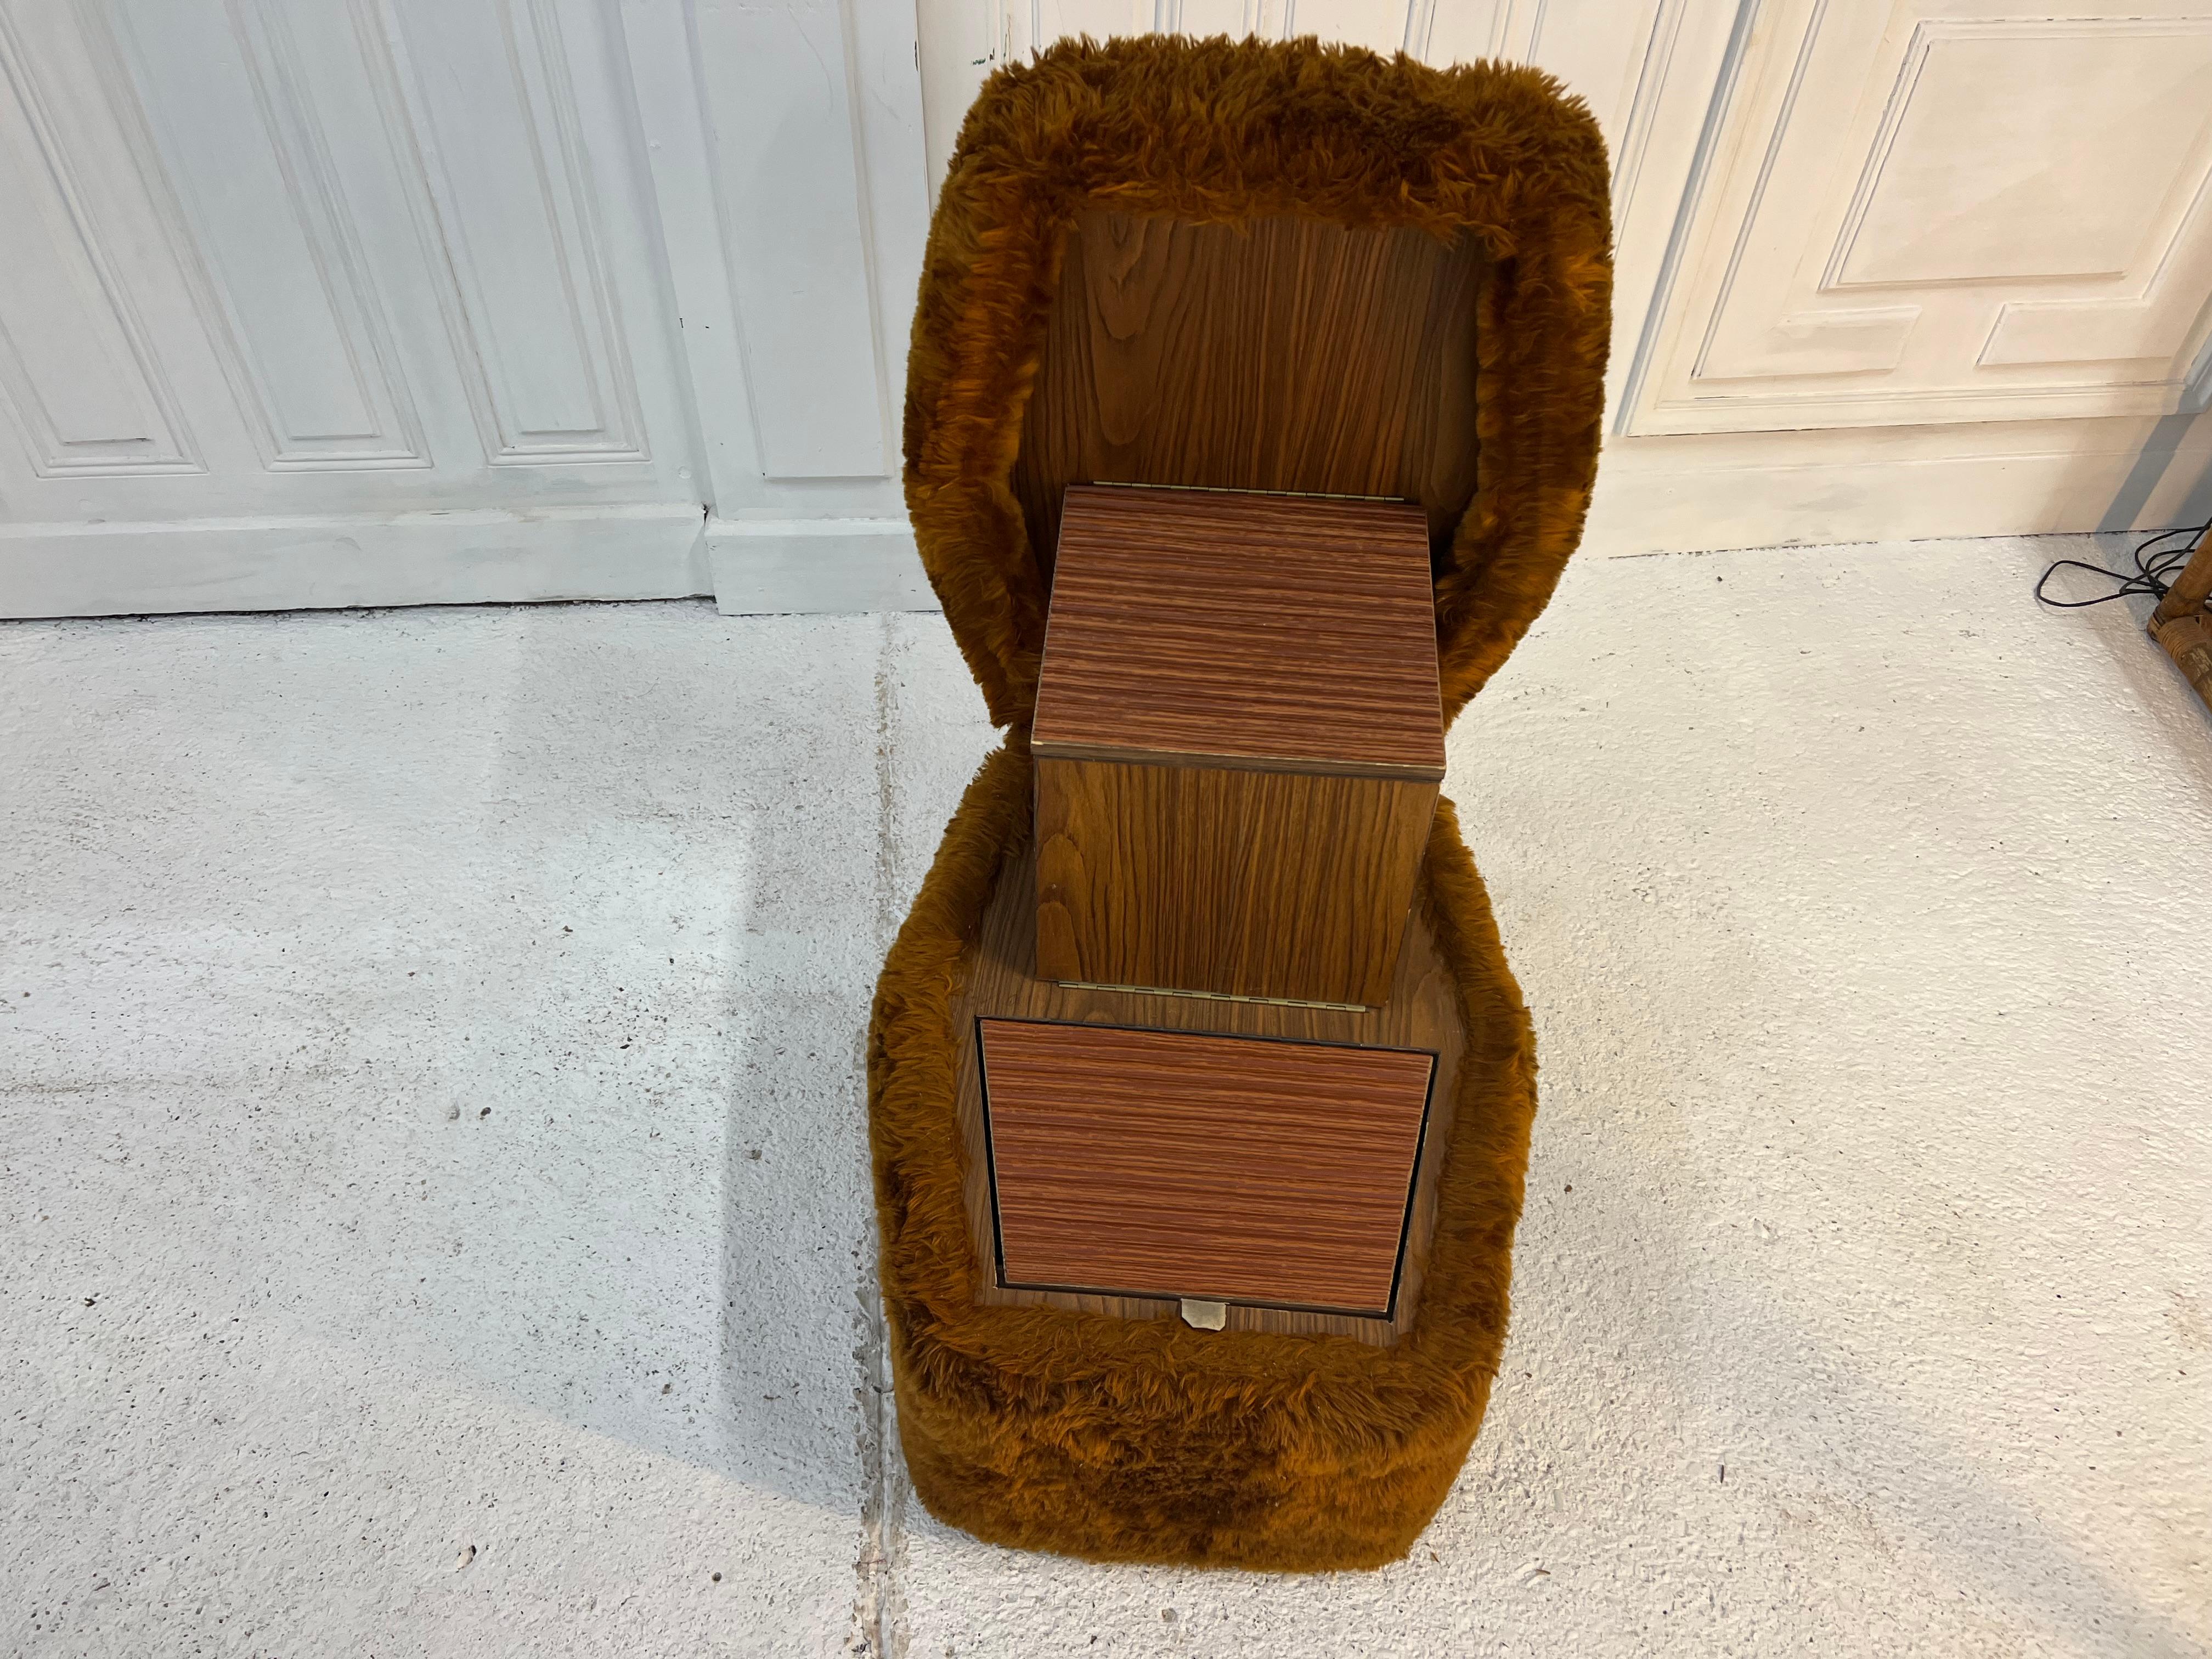 Amazing step from the 60s covered with brown faux fur
it opens to develop a small 2 steps in order to access the right height as well as a small interior chest
the coating really immerses us in the kitsch of the 60s
Original ladder

